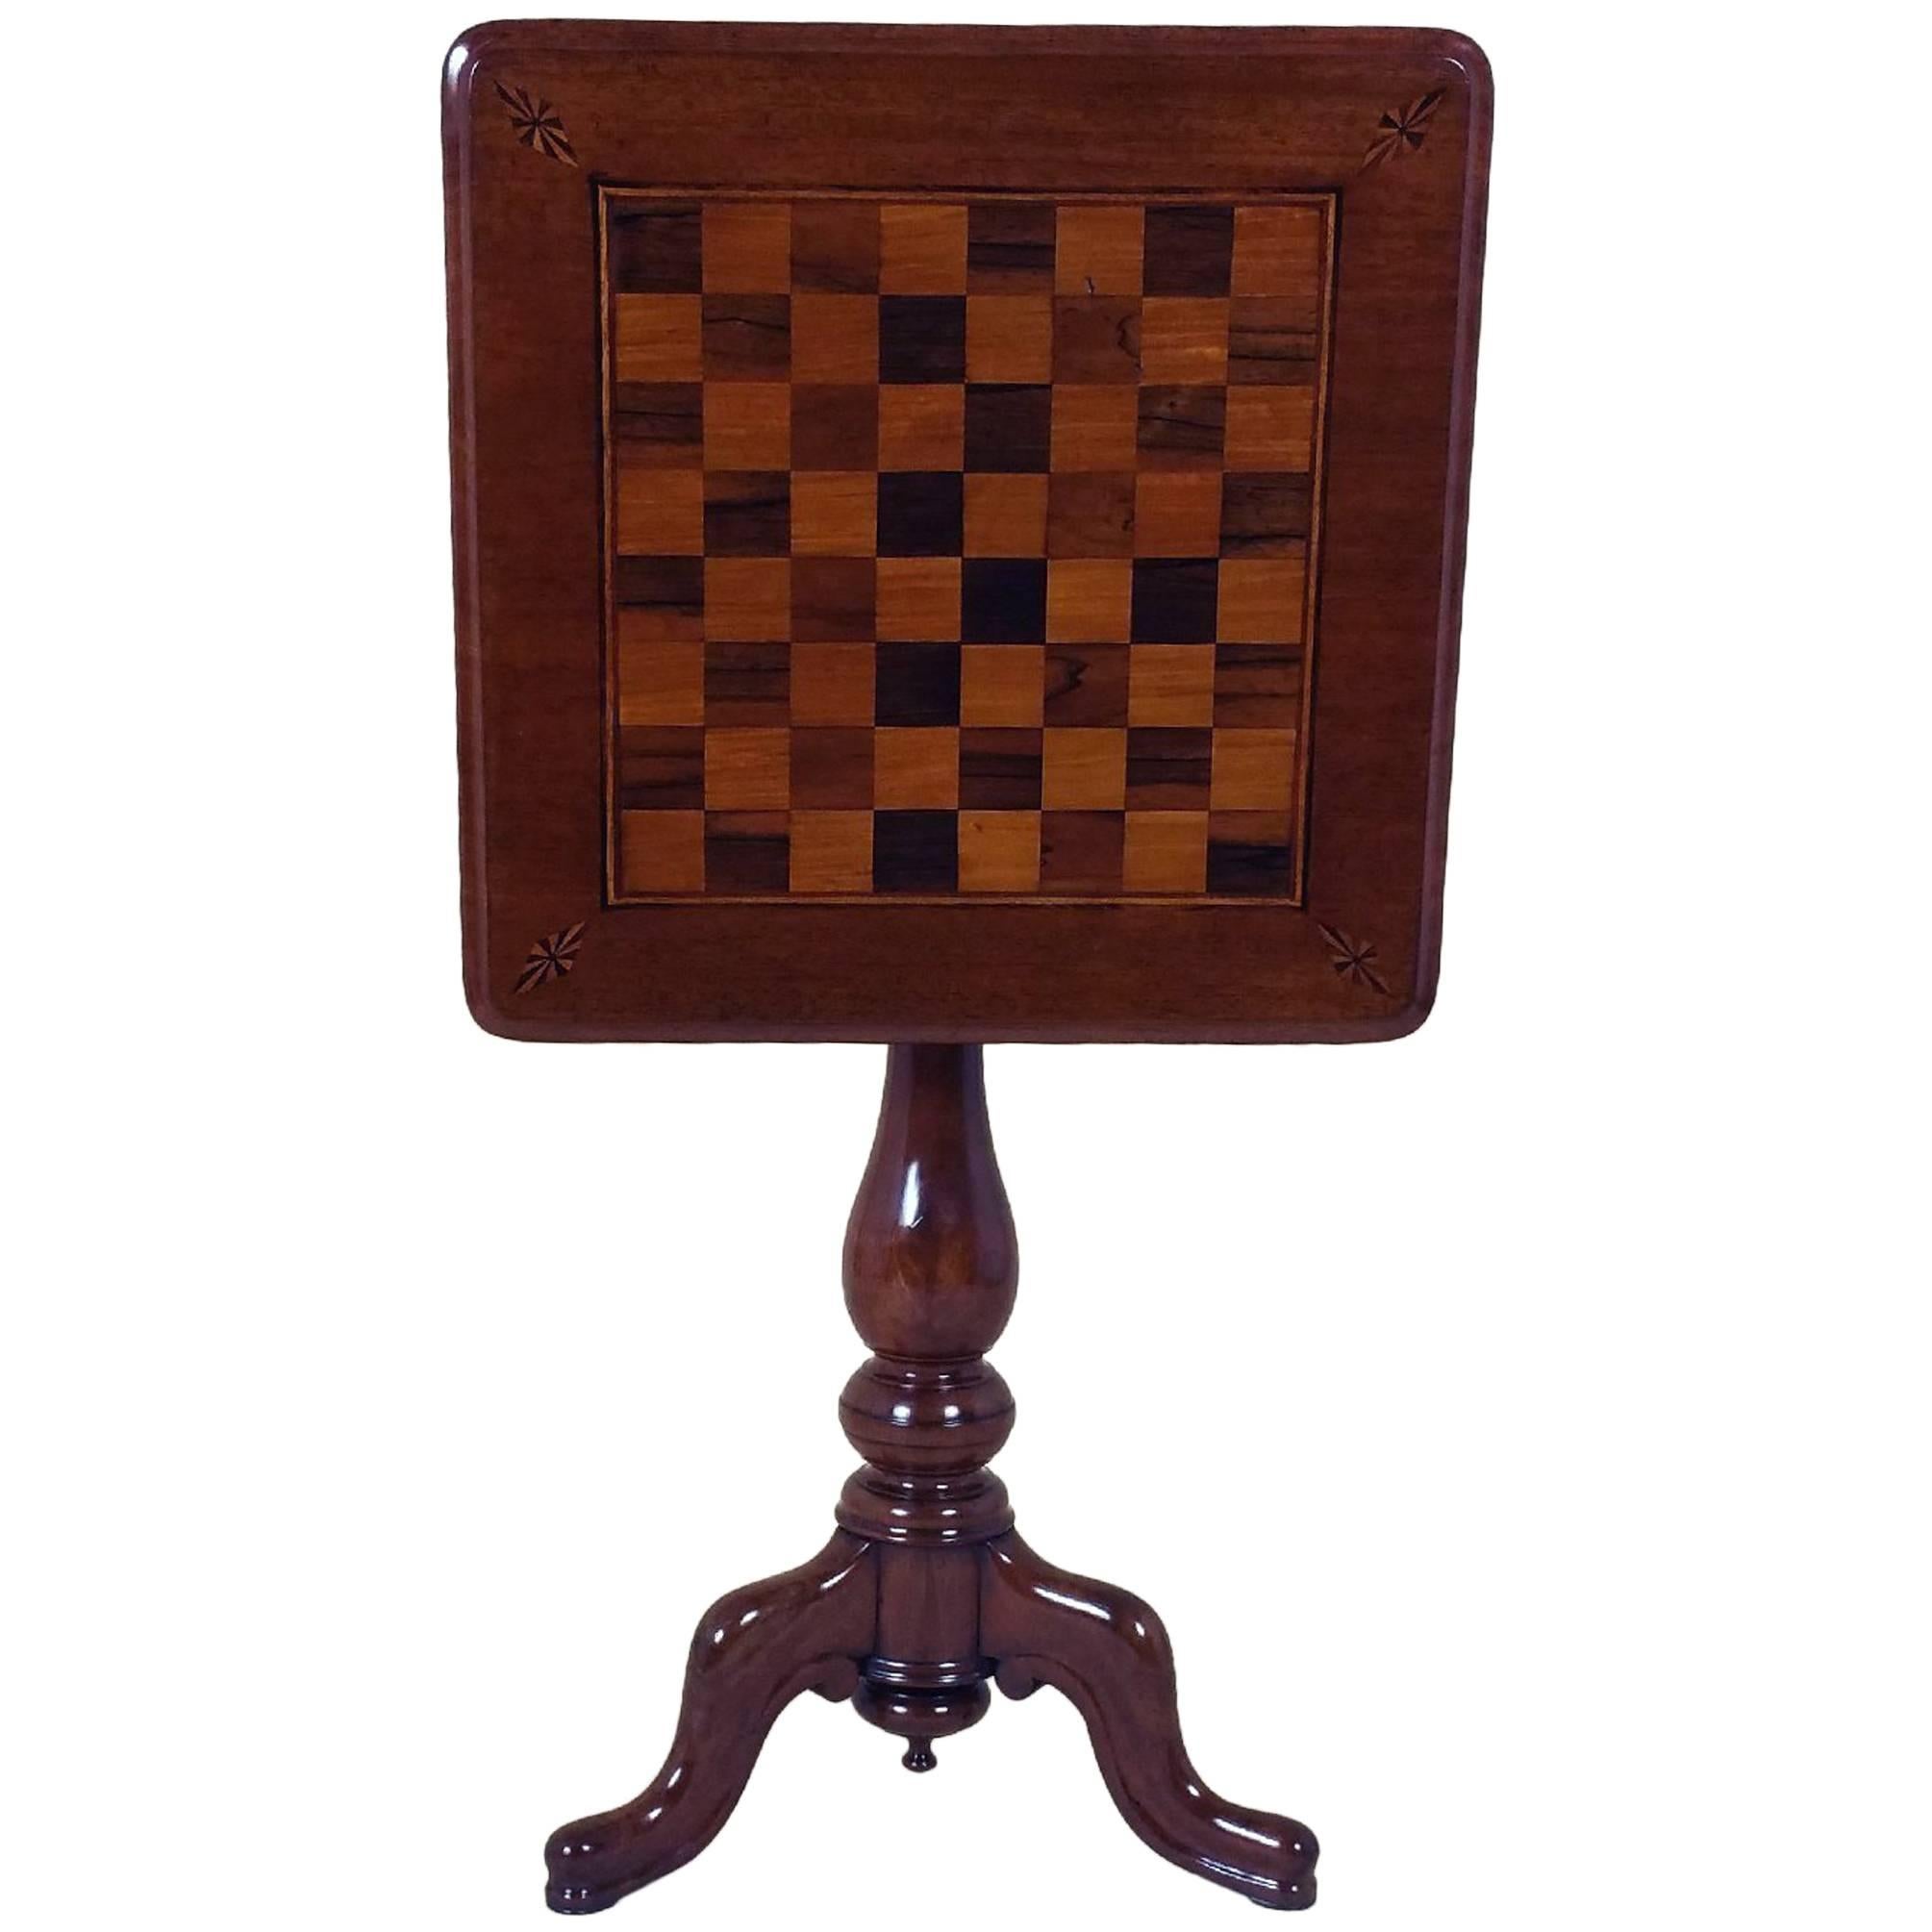 Victorian Mahogany Tilt-Top Chess Table on a Tripod Support